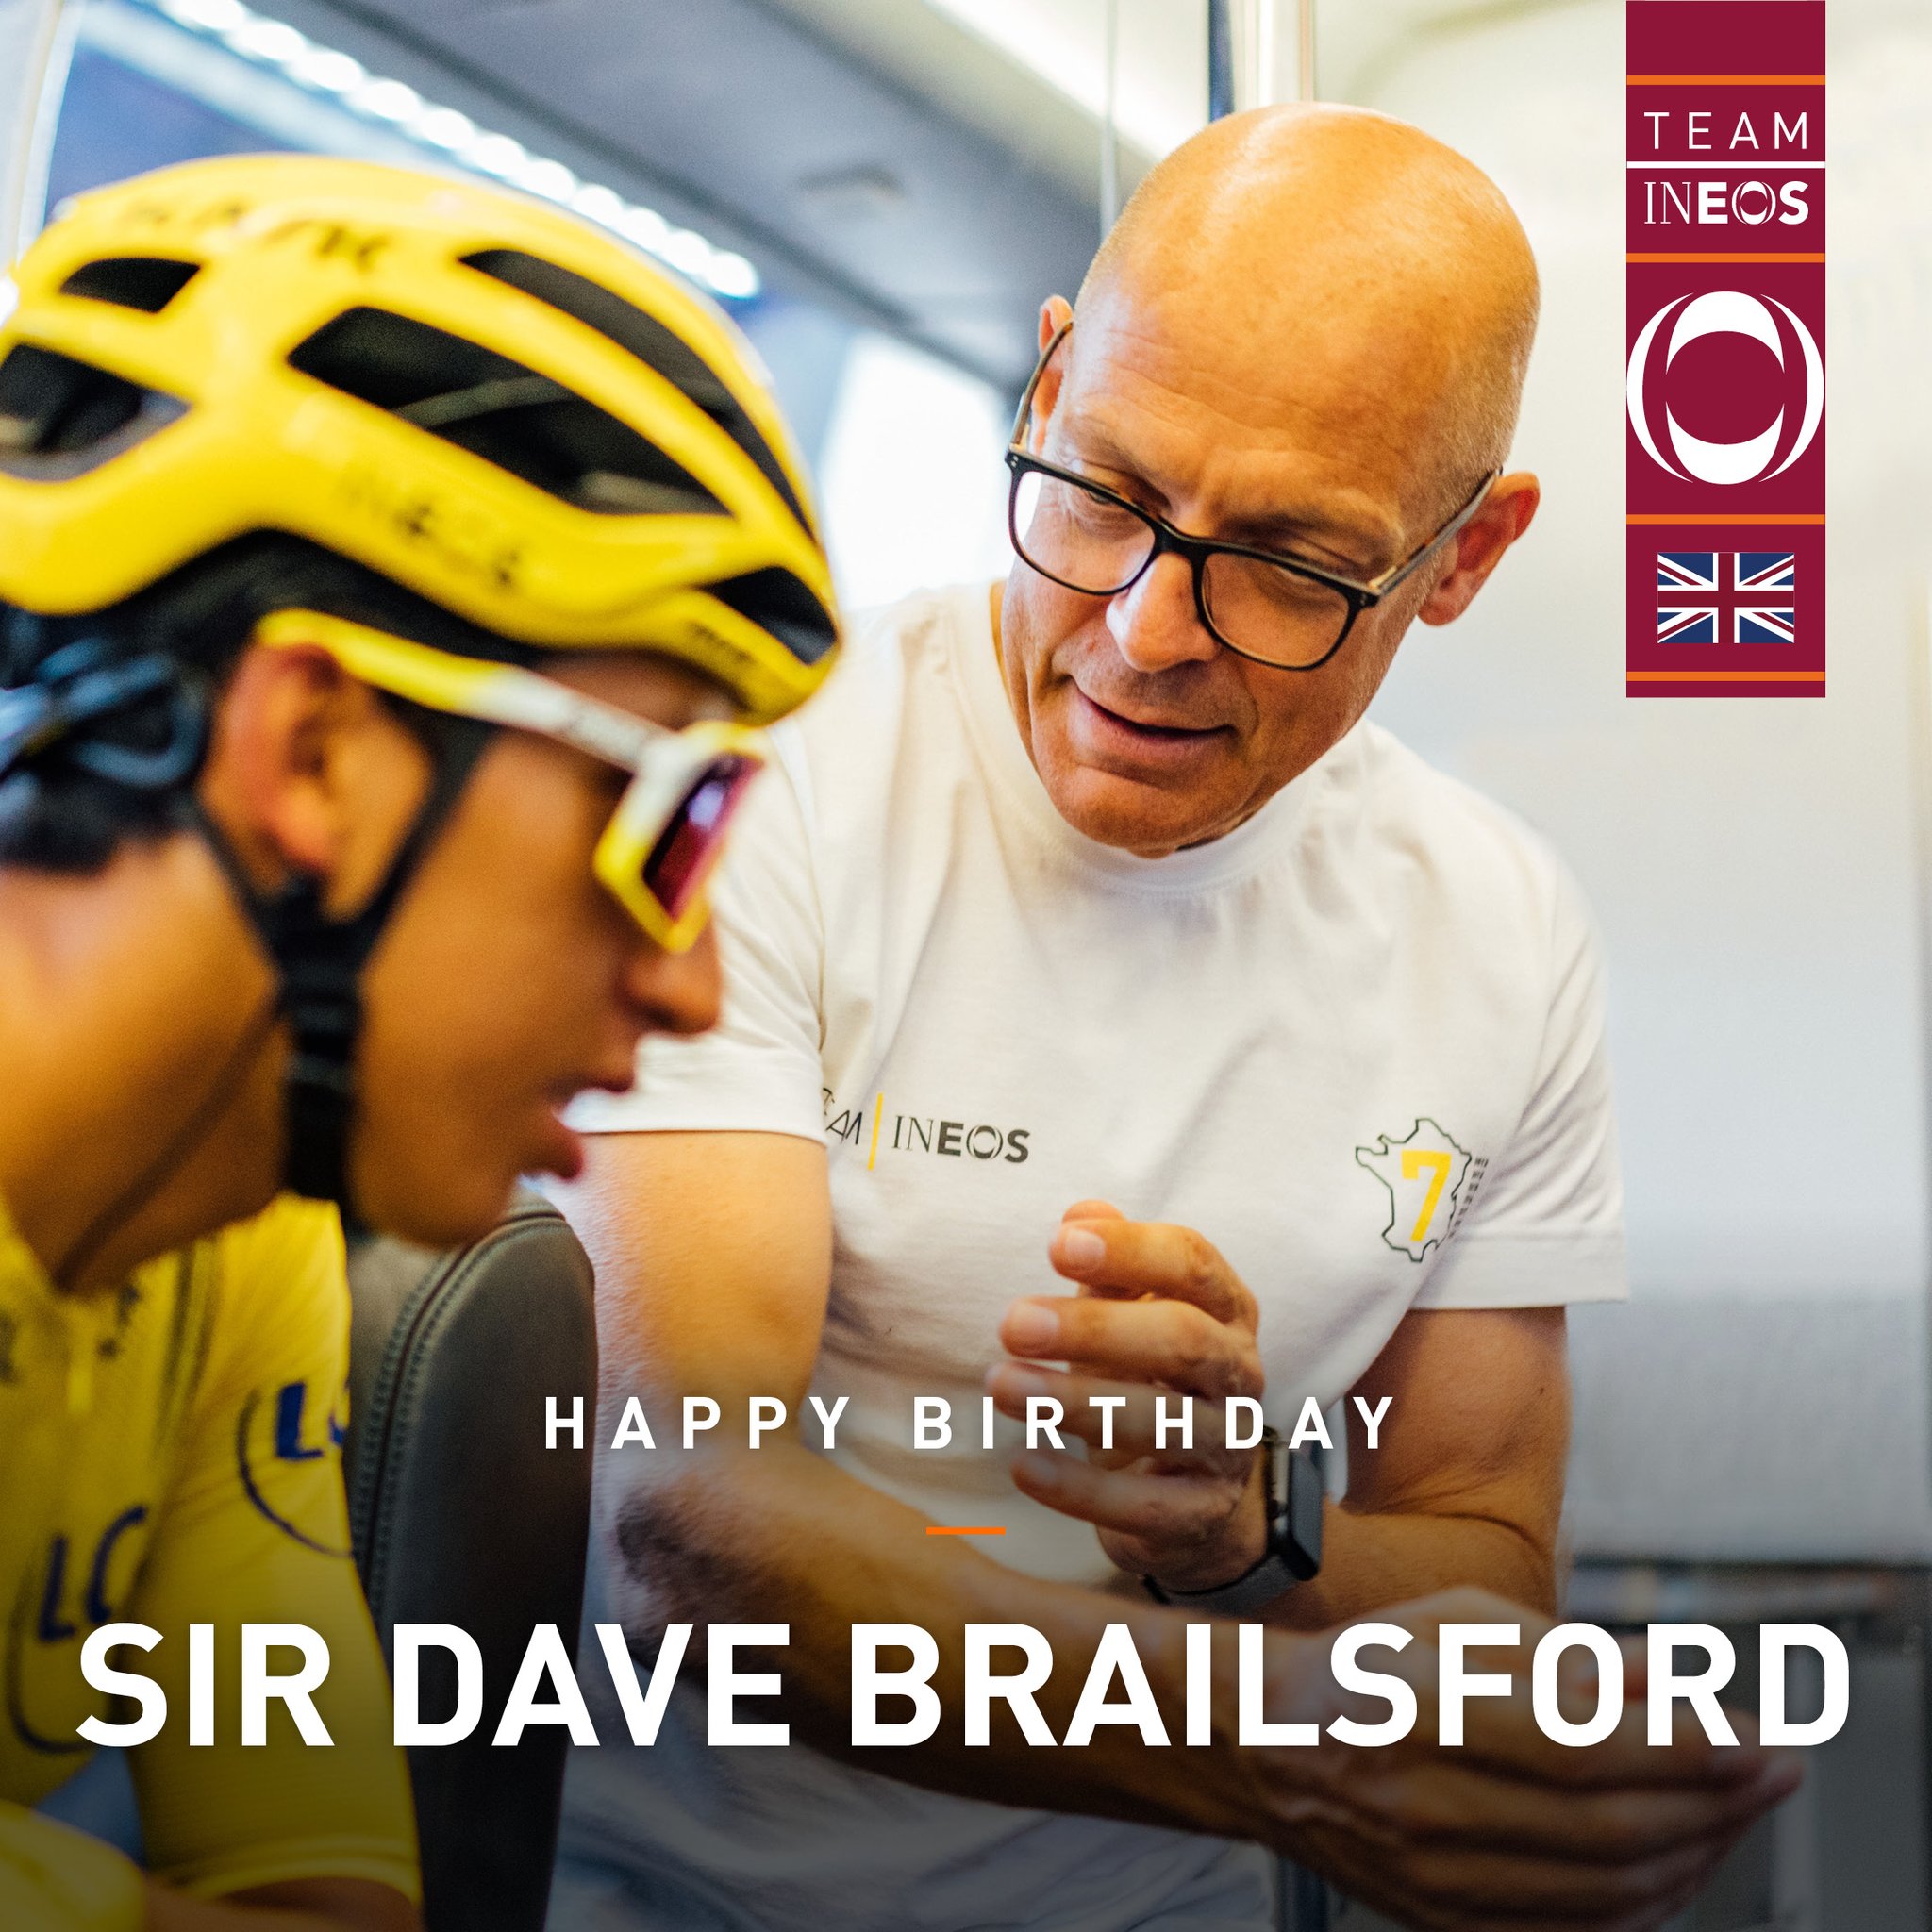 Happy Birthday to Sir Dave Brailsford. Born on a leap year, he turns 56 (or 14!) today 